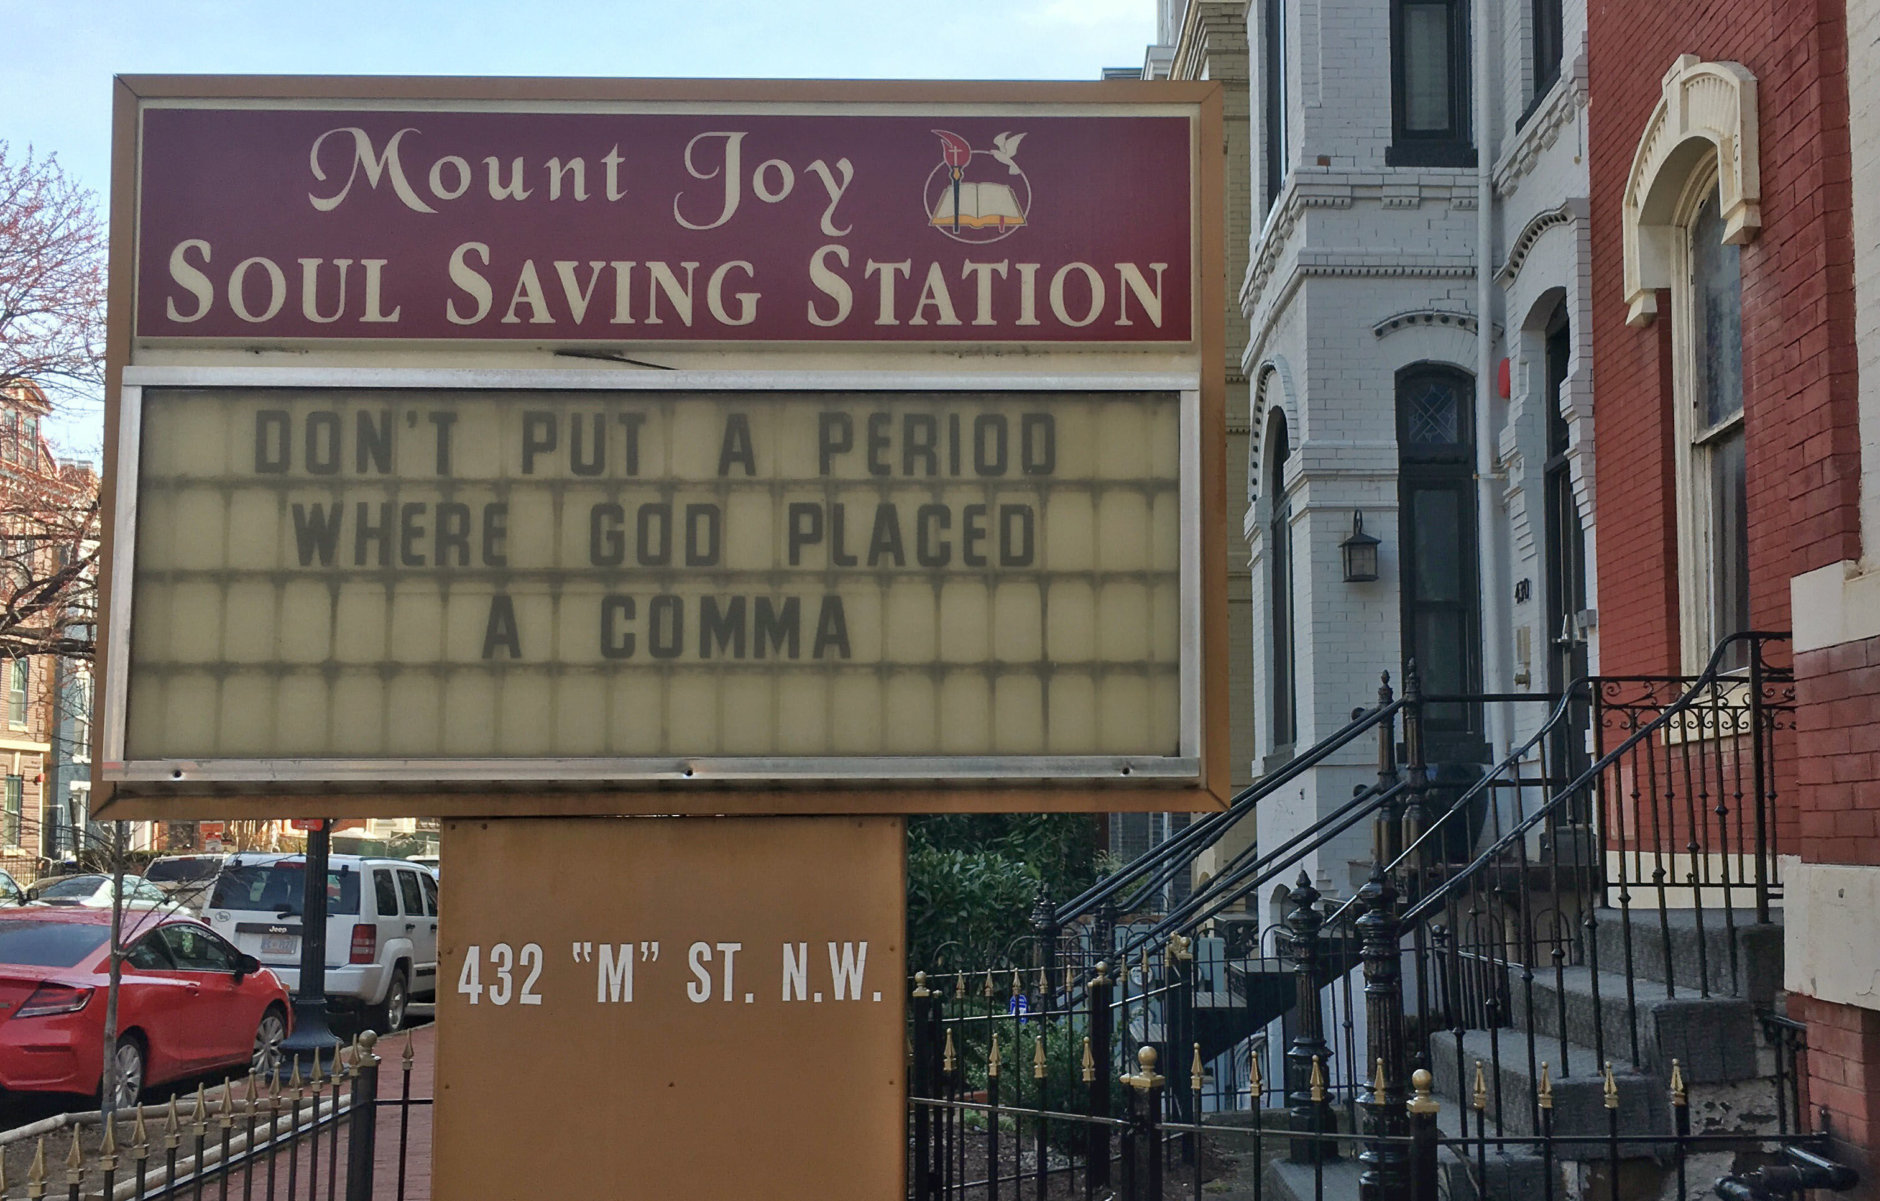 Mount Joy Soul Saving Station, which has sat on the corner of M and Fourth streets for more than 40 years. As the congregation well knows, redevelopment and revitalization in D.C. has not come without its downsides. (WTOP/Jack Moore)